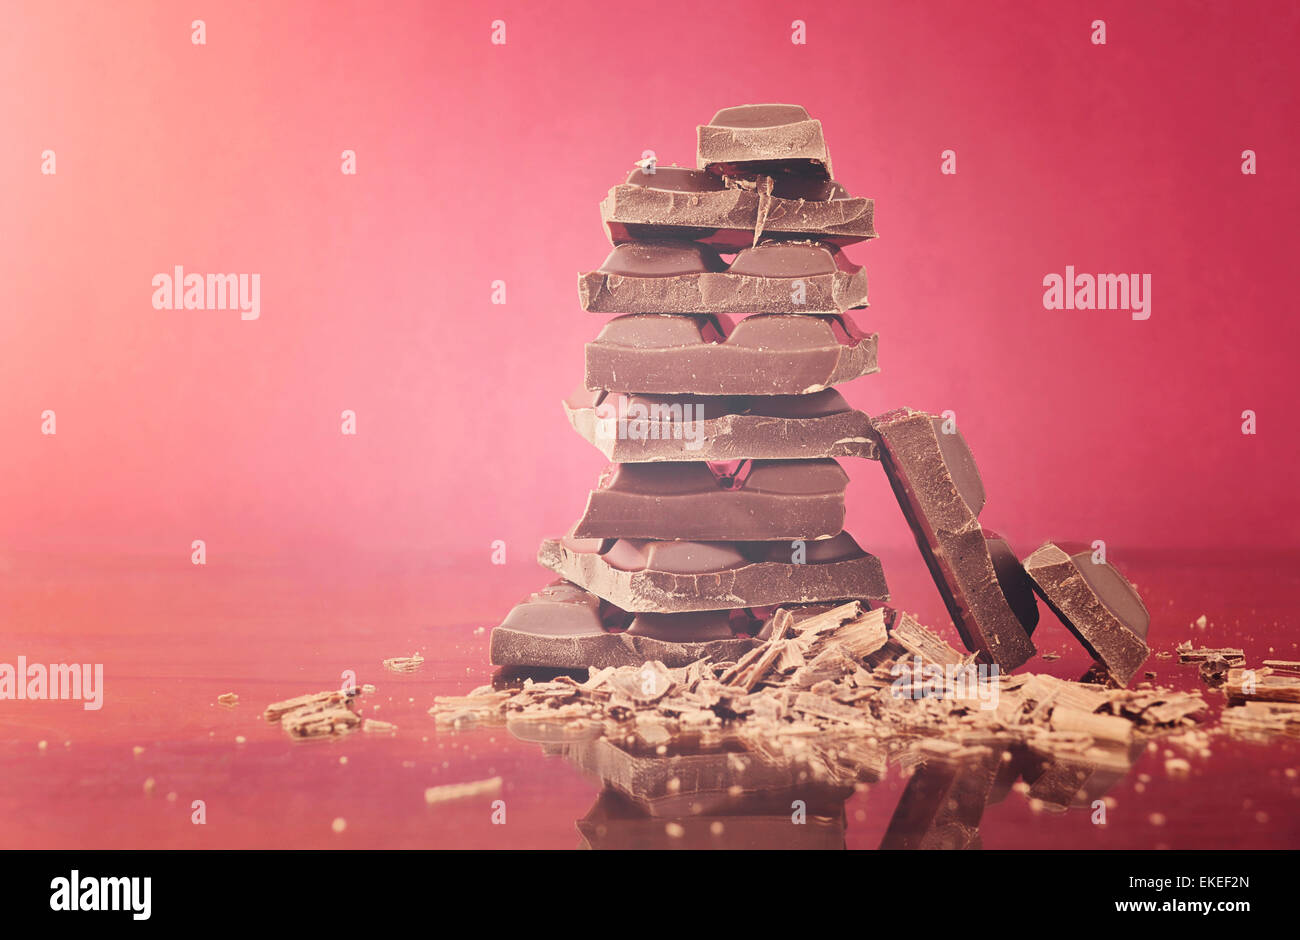 Stack of chocolate on reflective glass against red background with applied retro vintage style filters and added light flare. Stock Photo